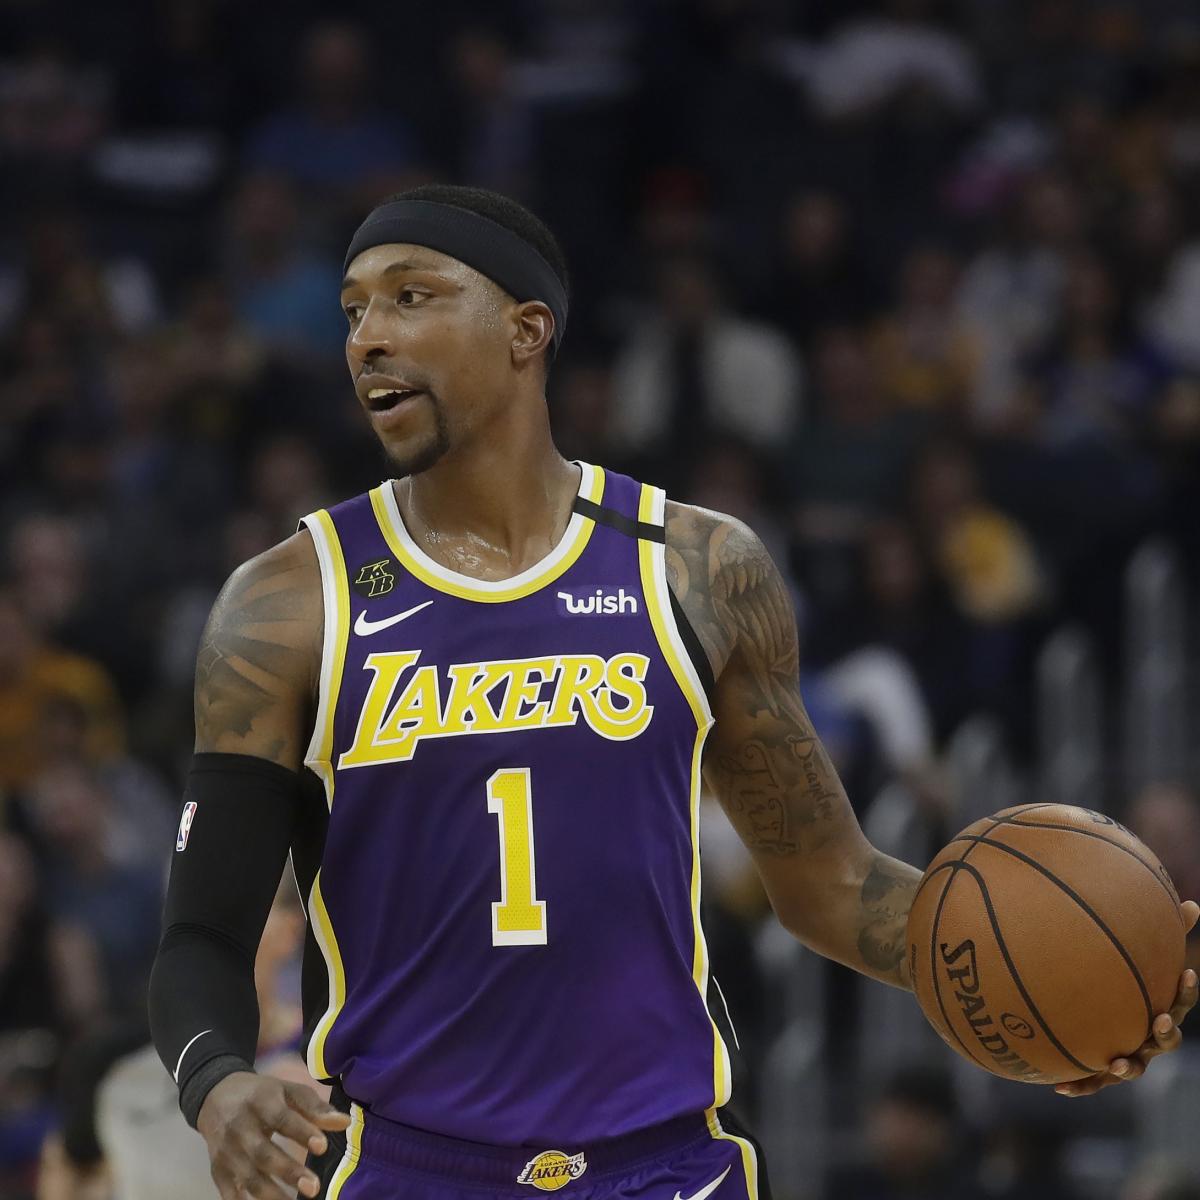 Report: Lakers' Caldwell-Pope to decline player option